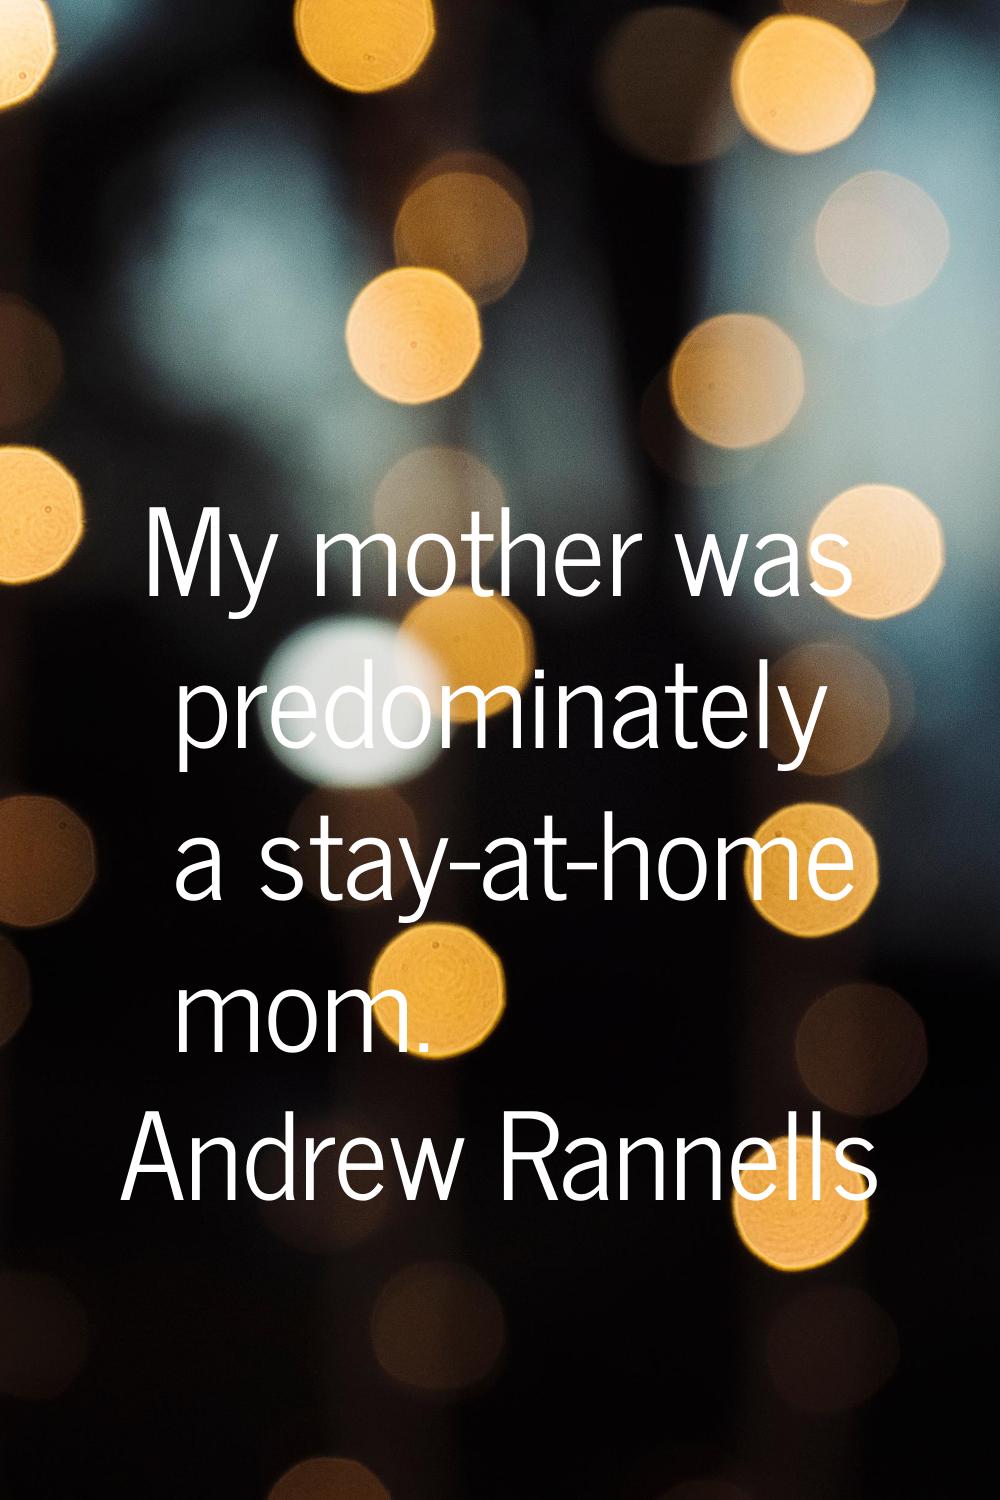 My mother was predominately a stay-at-home mom.